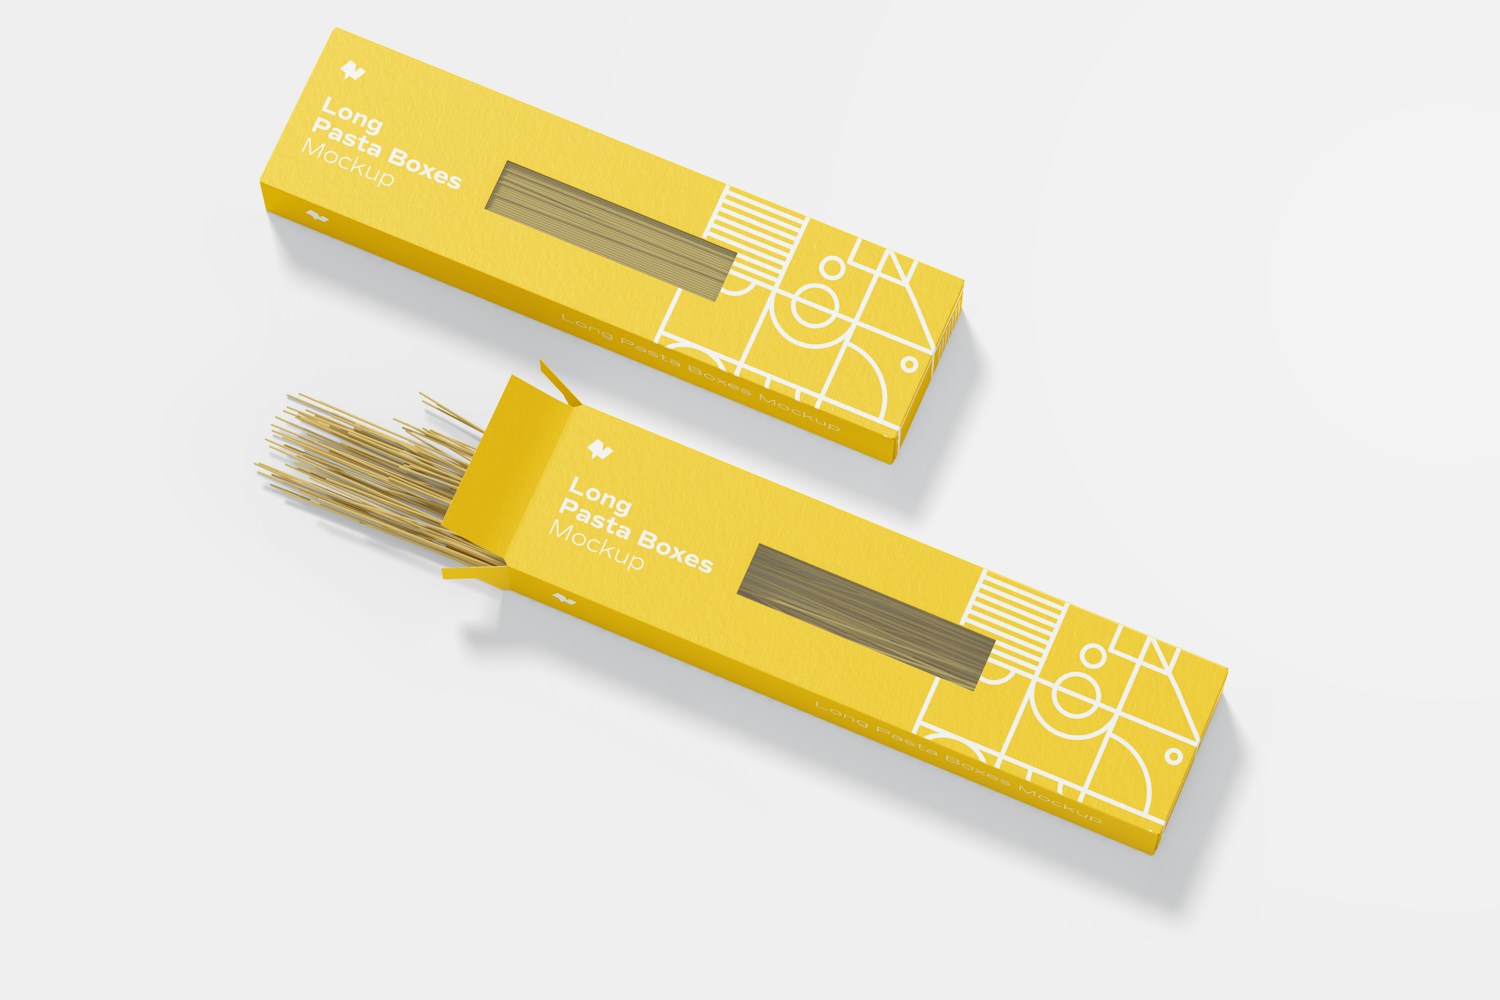 Long Pasta Boxes Mockup, Opened and Closed